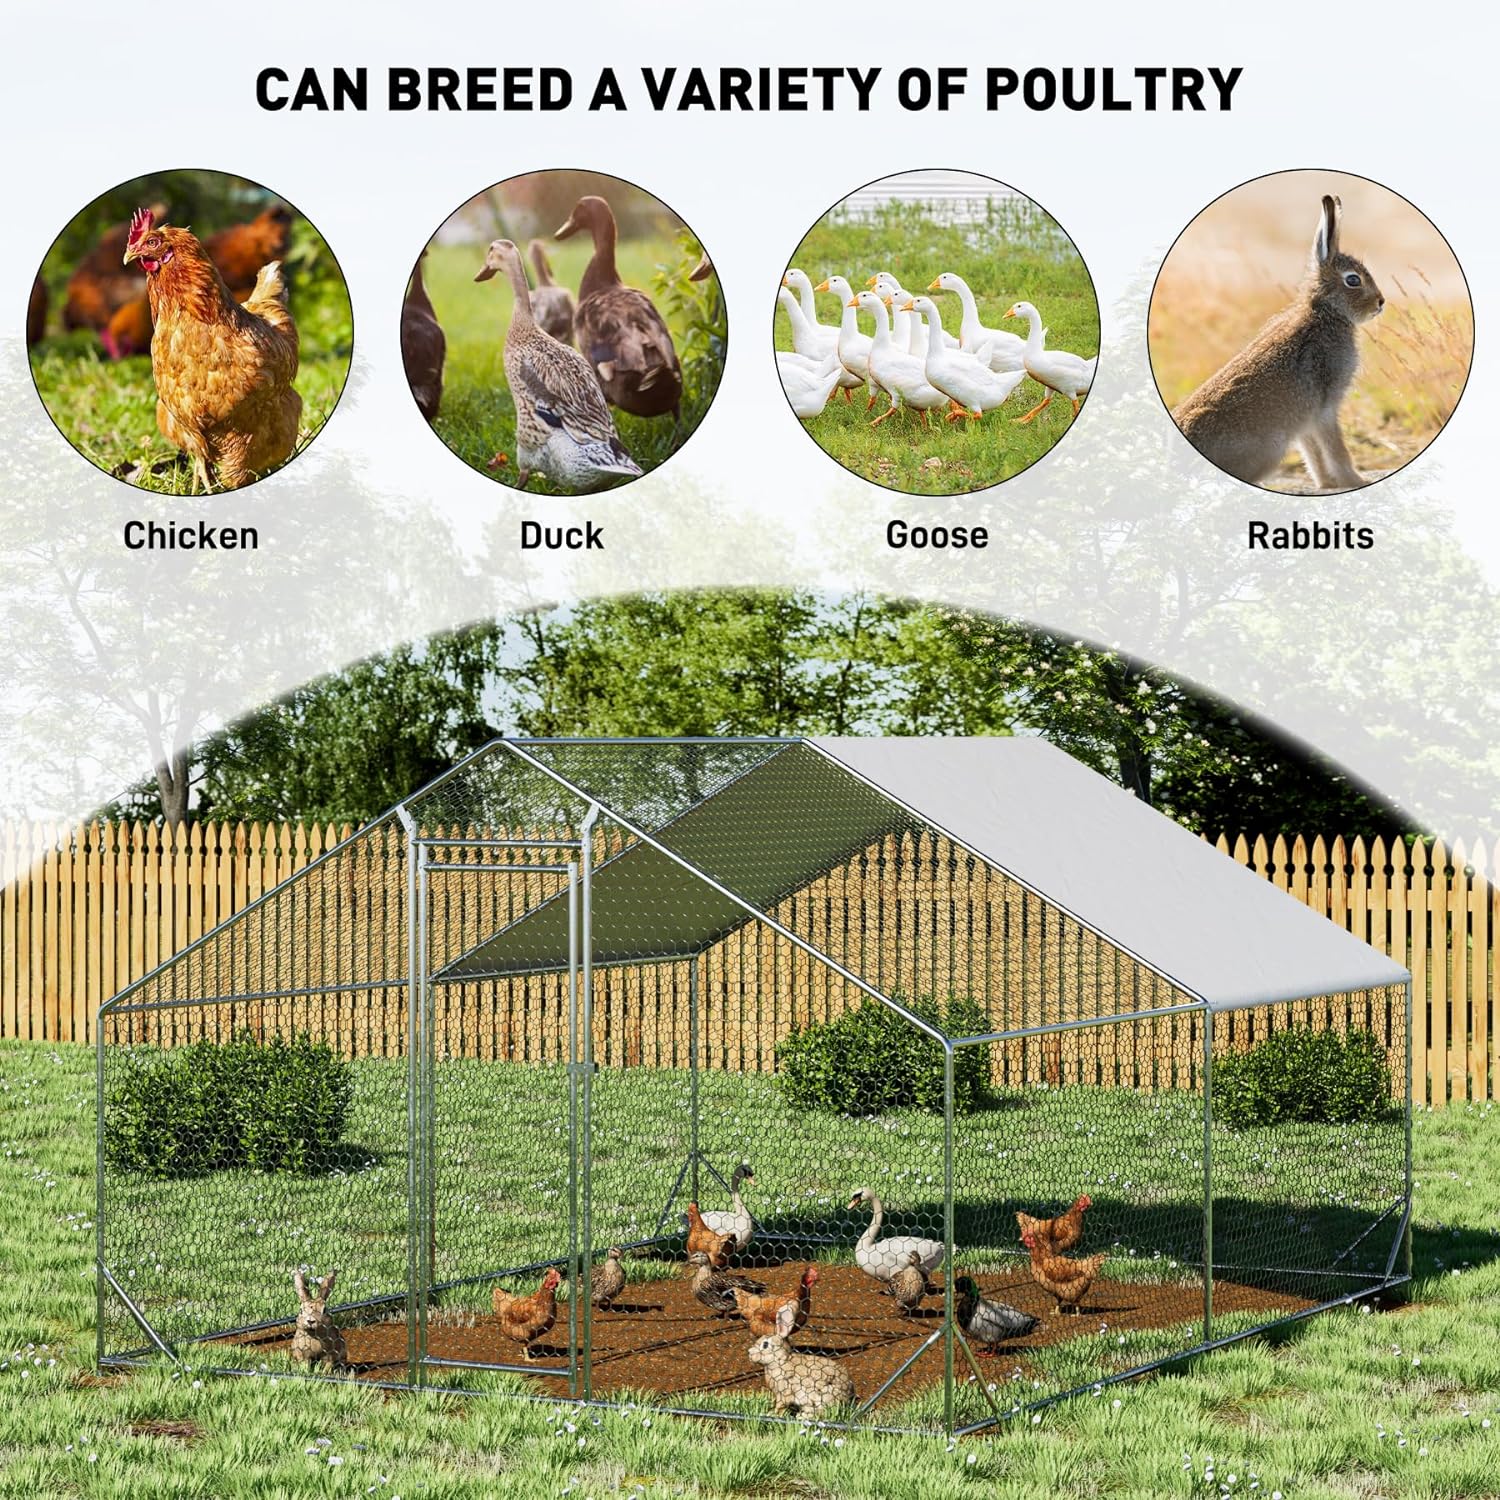 OUYESSIR Outdoor Metal Chicken Coop, Large Walk-in Chicken Run Pen with Waterproof Cover, Rabbit Habitat Poultry Cage for Backyard Farm Use (10âL x13âW x 6.56âH, Silver)